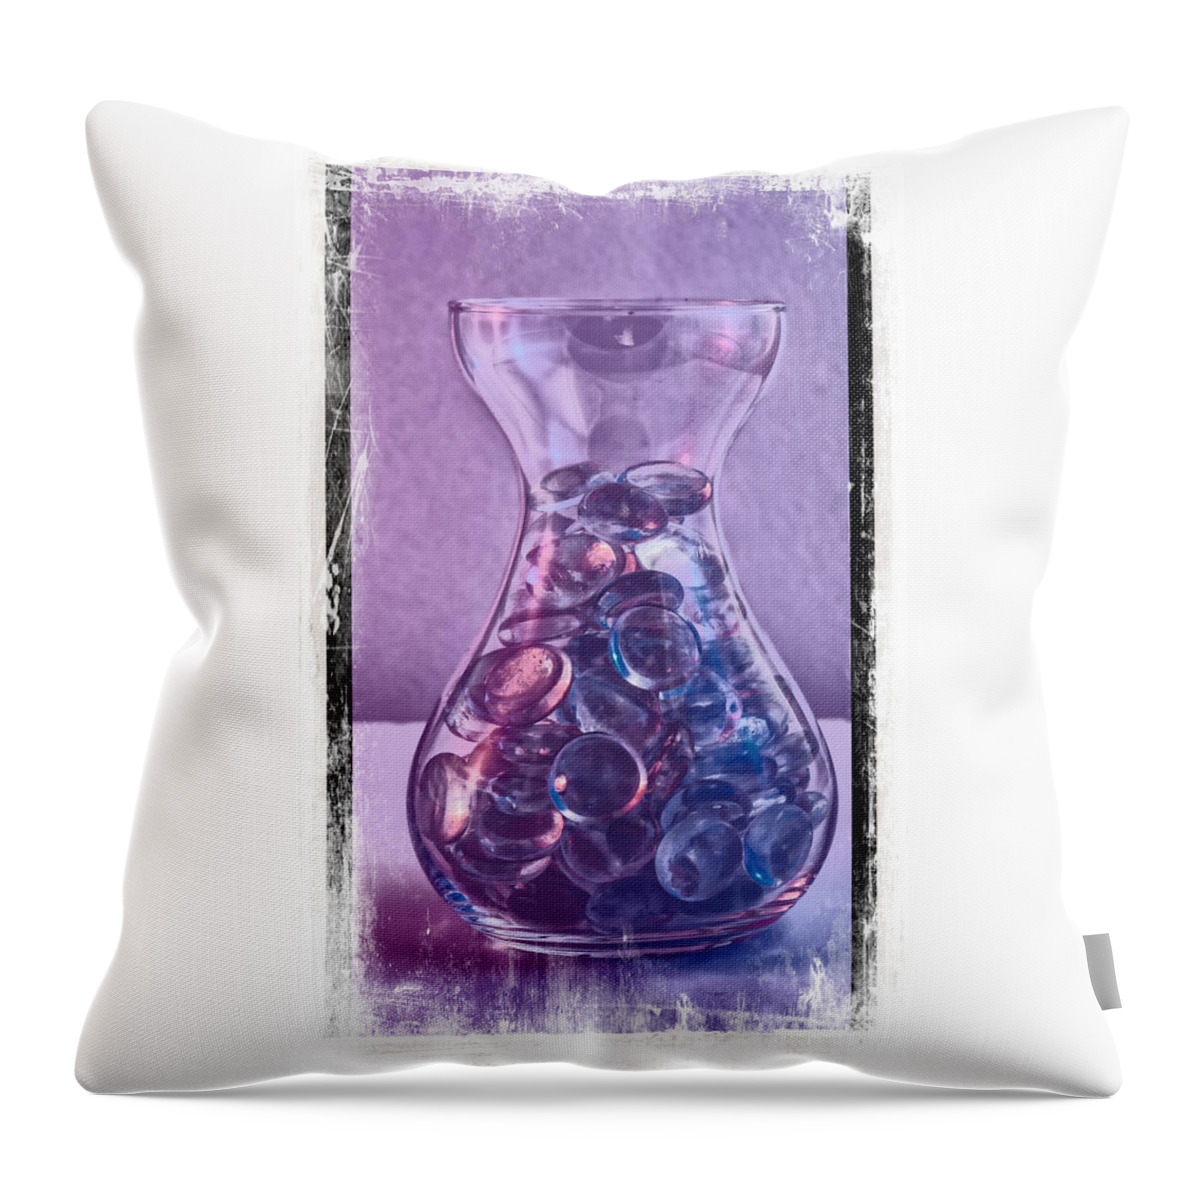 Pebble Throw Pillow featuring the photograph Jar of glass pebbles in hues of blue and purple. by John Paul Cullen